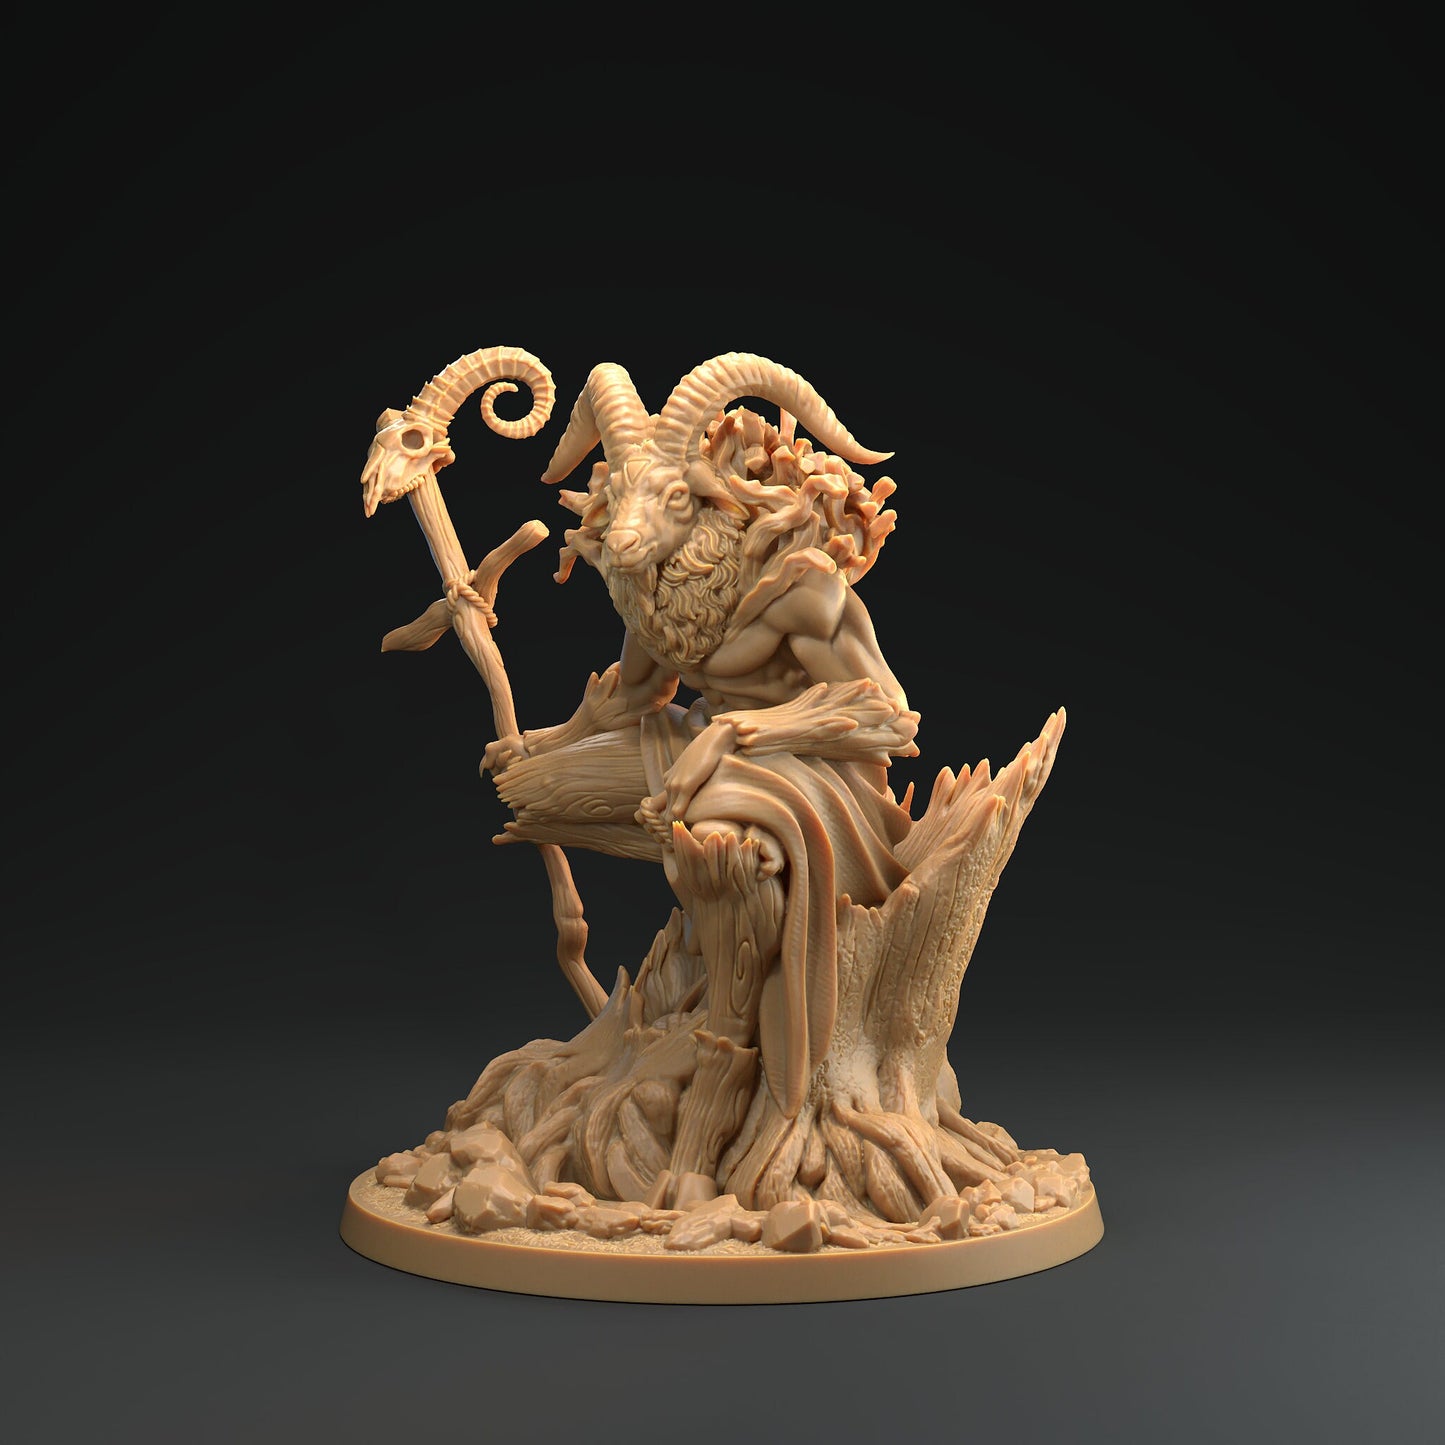 Pan, Faun Sire | RPG Miniature for Dungeons and Dragons|Pathfinder|Tabletop Wargaming | Fey Miniature | Dragon Trappers Lodge